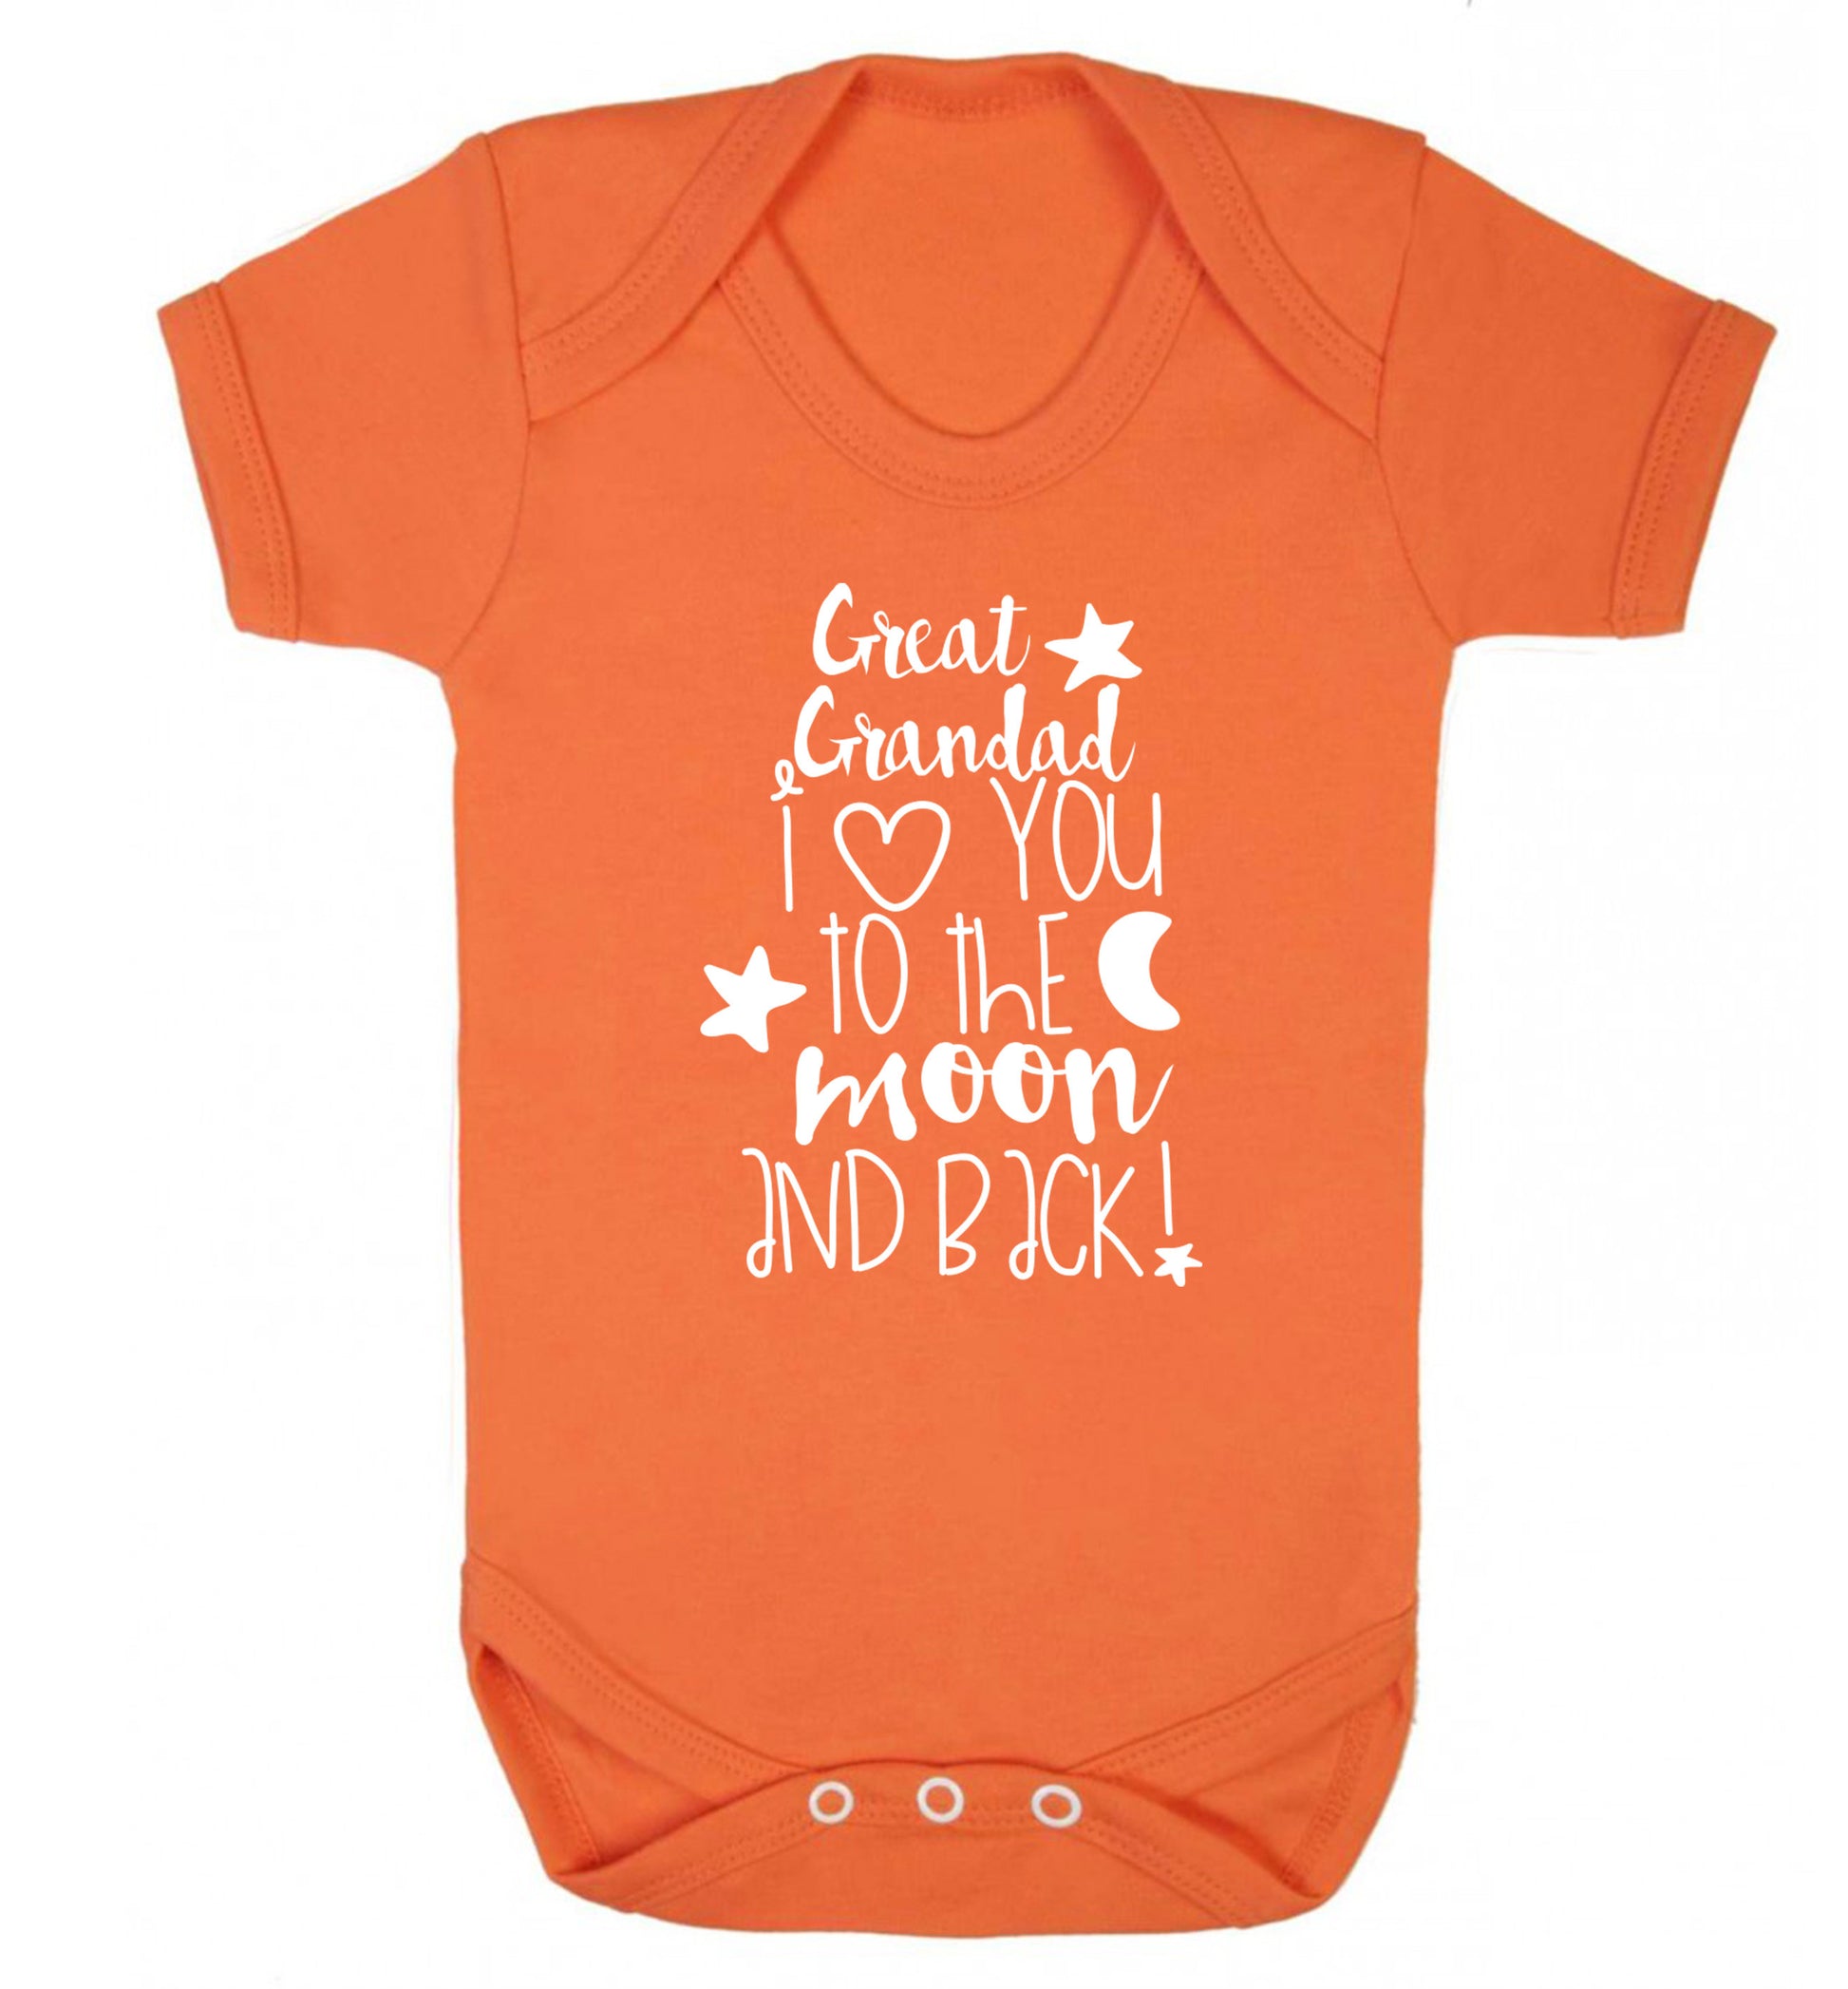 Great Grandad I love you to the moon and back Baby Vest orange 18-24 months